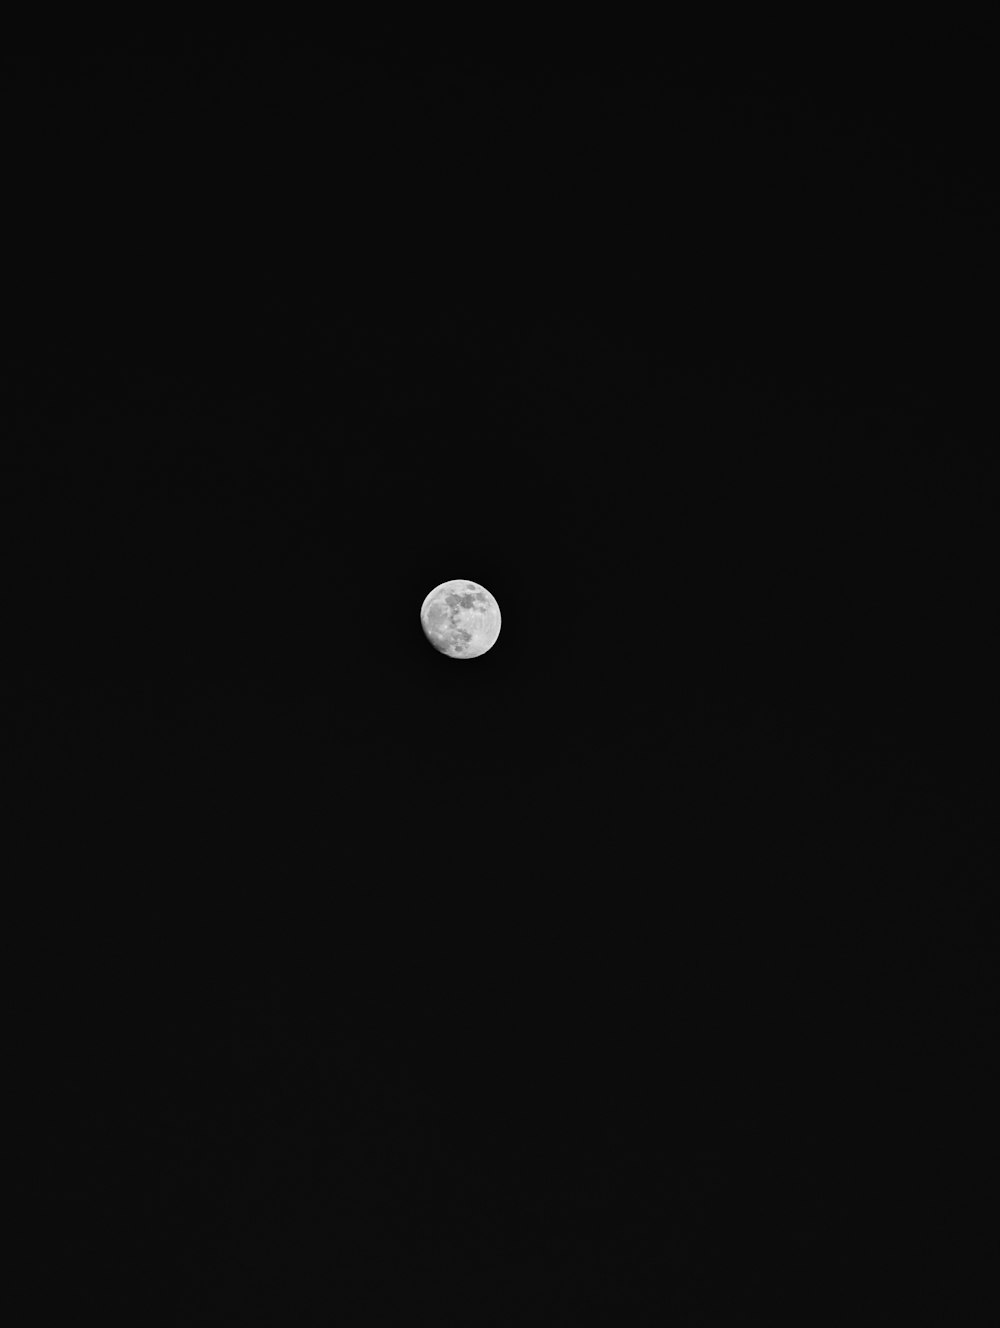 a black and white photo of the moon